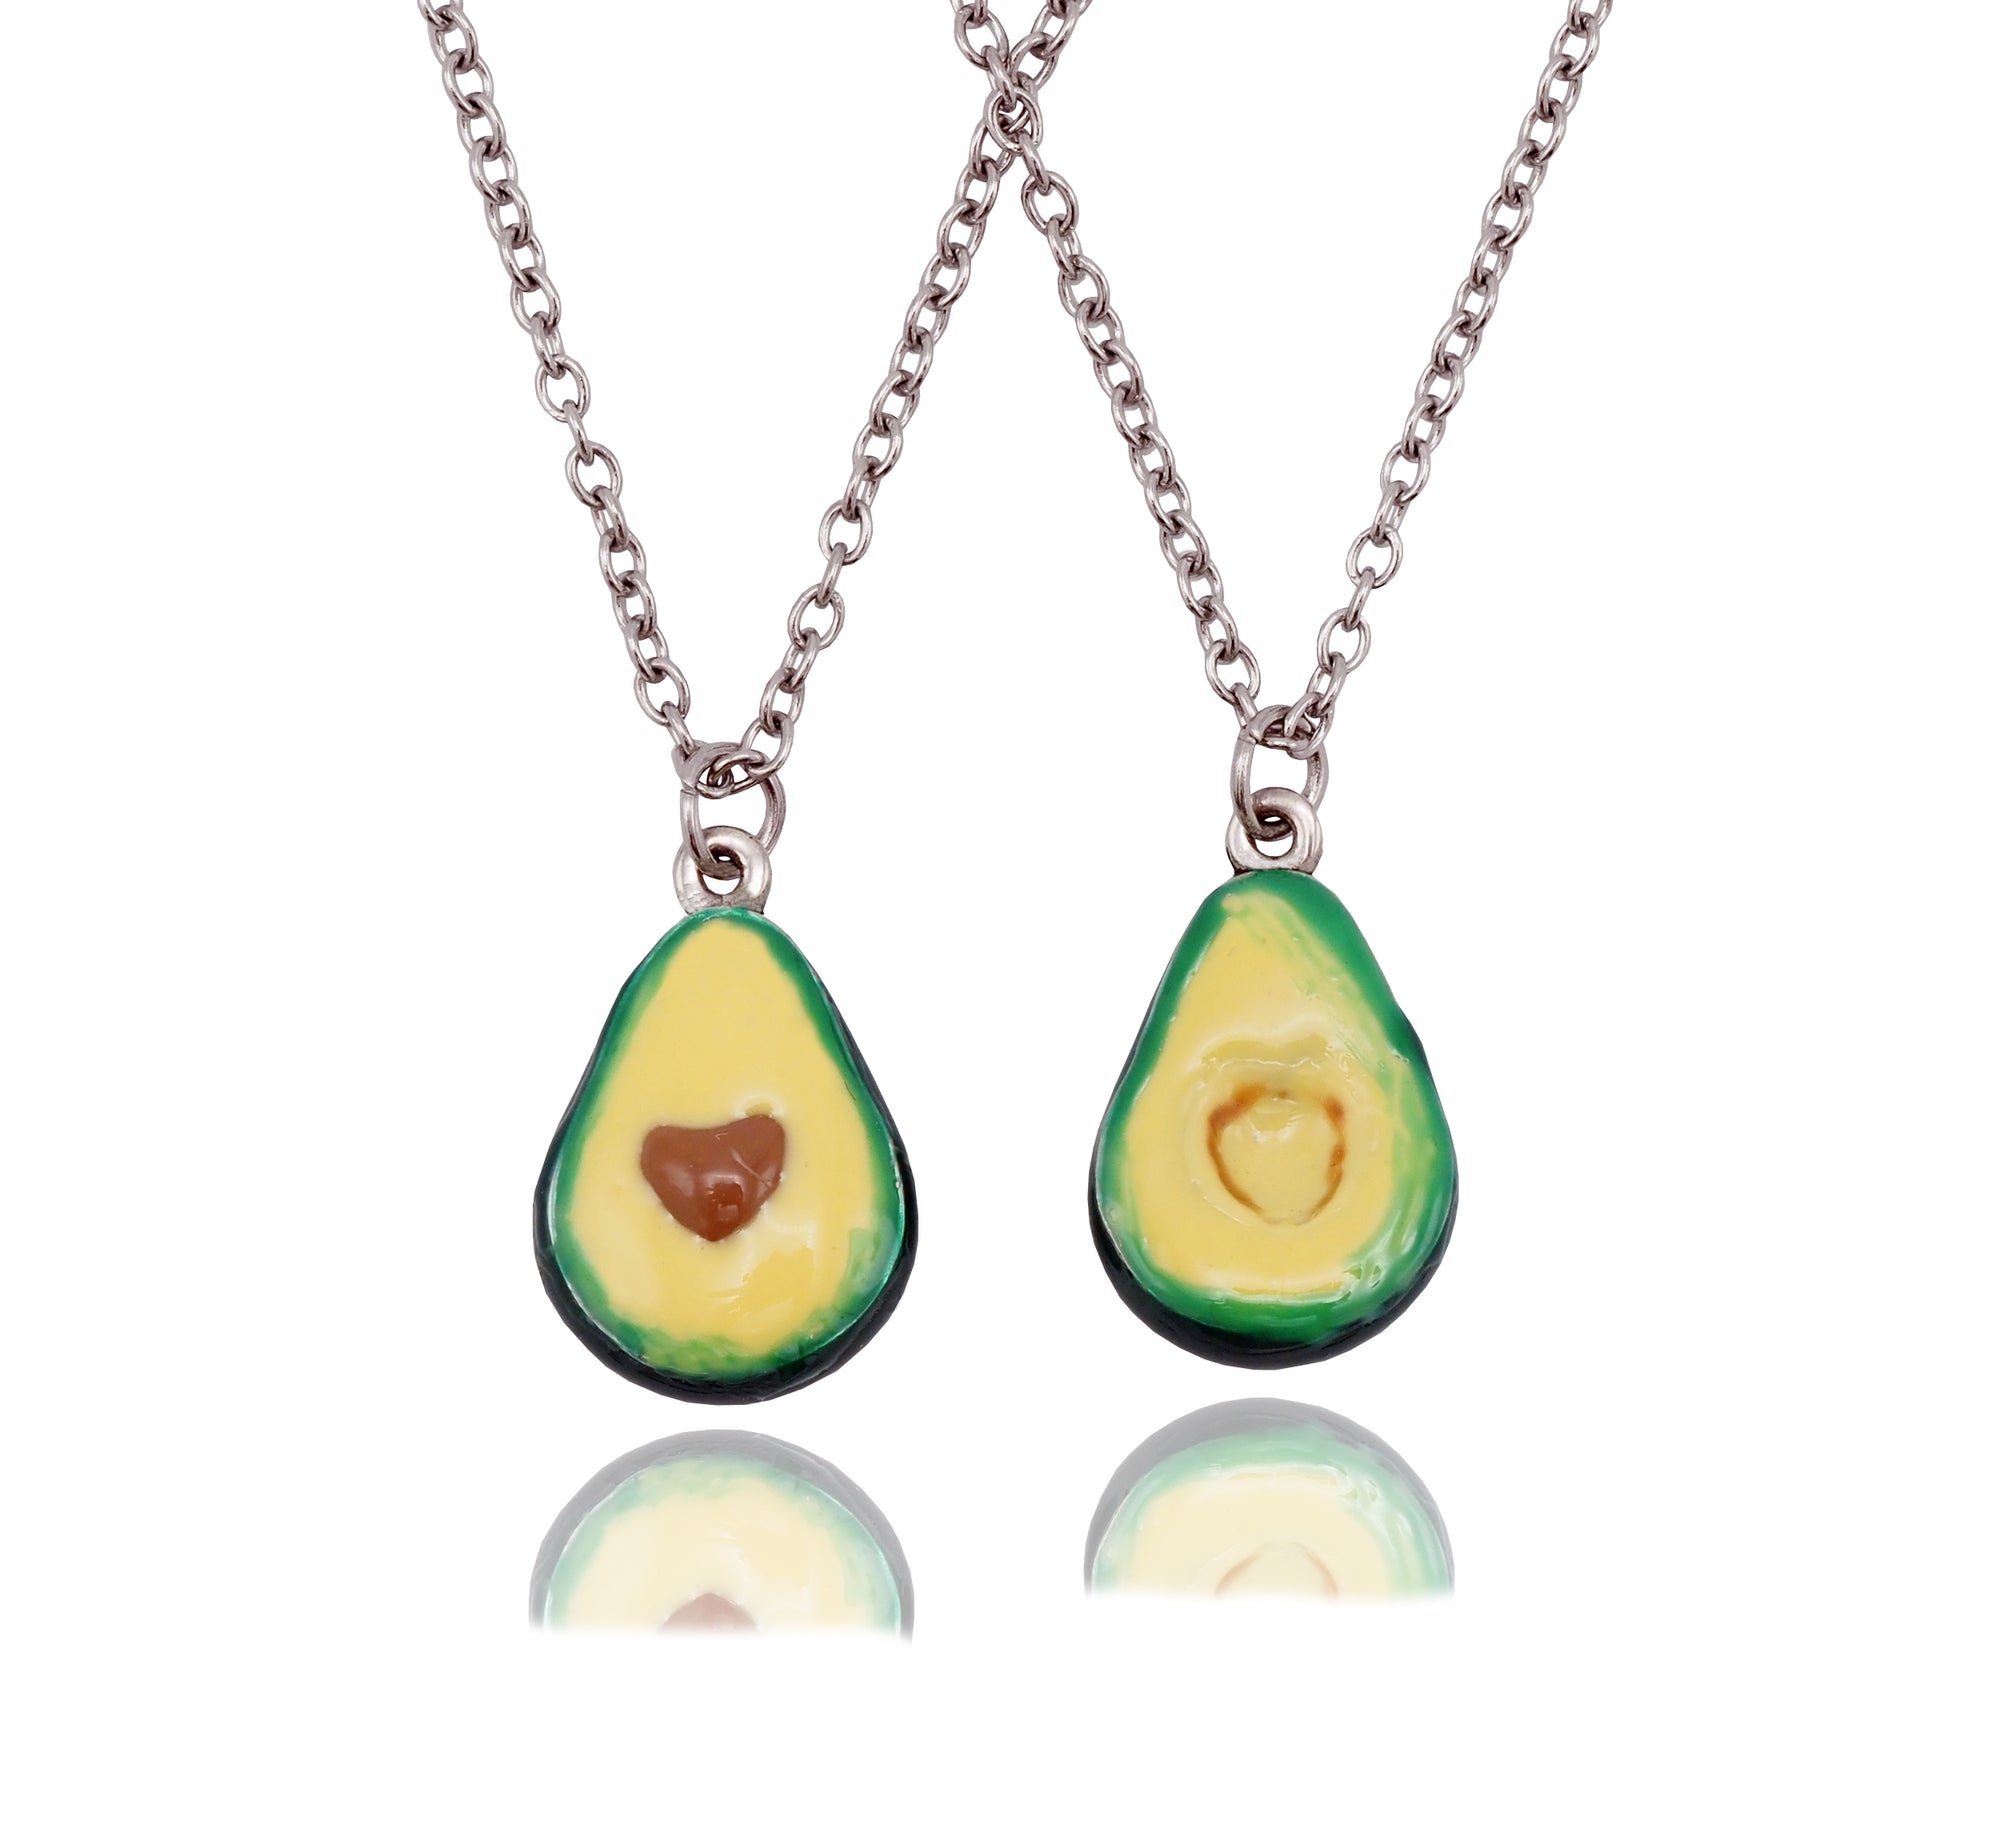 2Pcs/Set Handcraft Handmade Green Avocado Bff Friendship Necklace Pendant  Earrings Keychain Heart Pit Valentines Love Bff Gift Bb Present Necklace  Best Friend Healthy Food Miniature | Wish